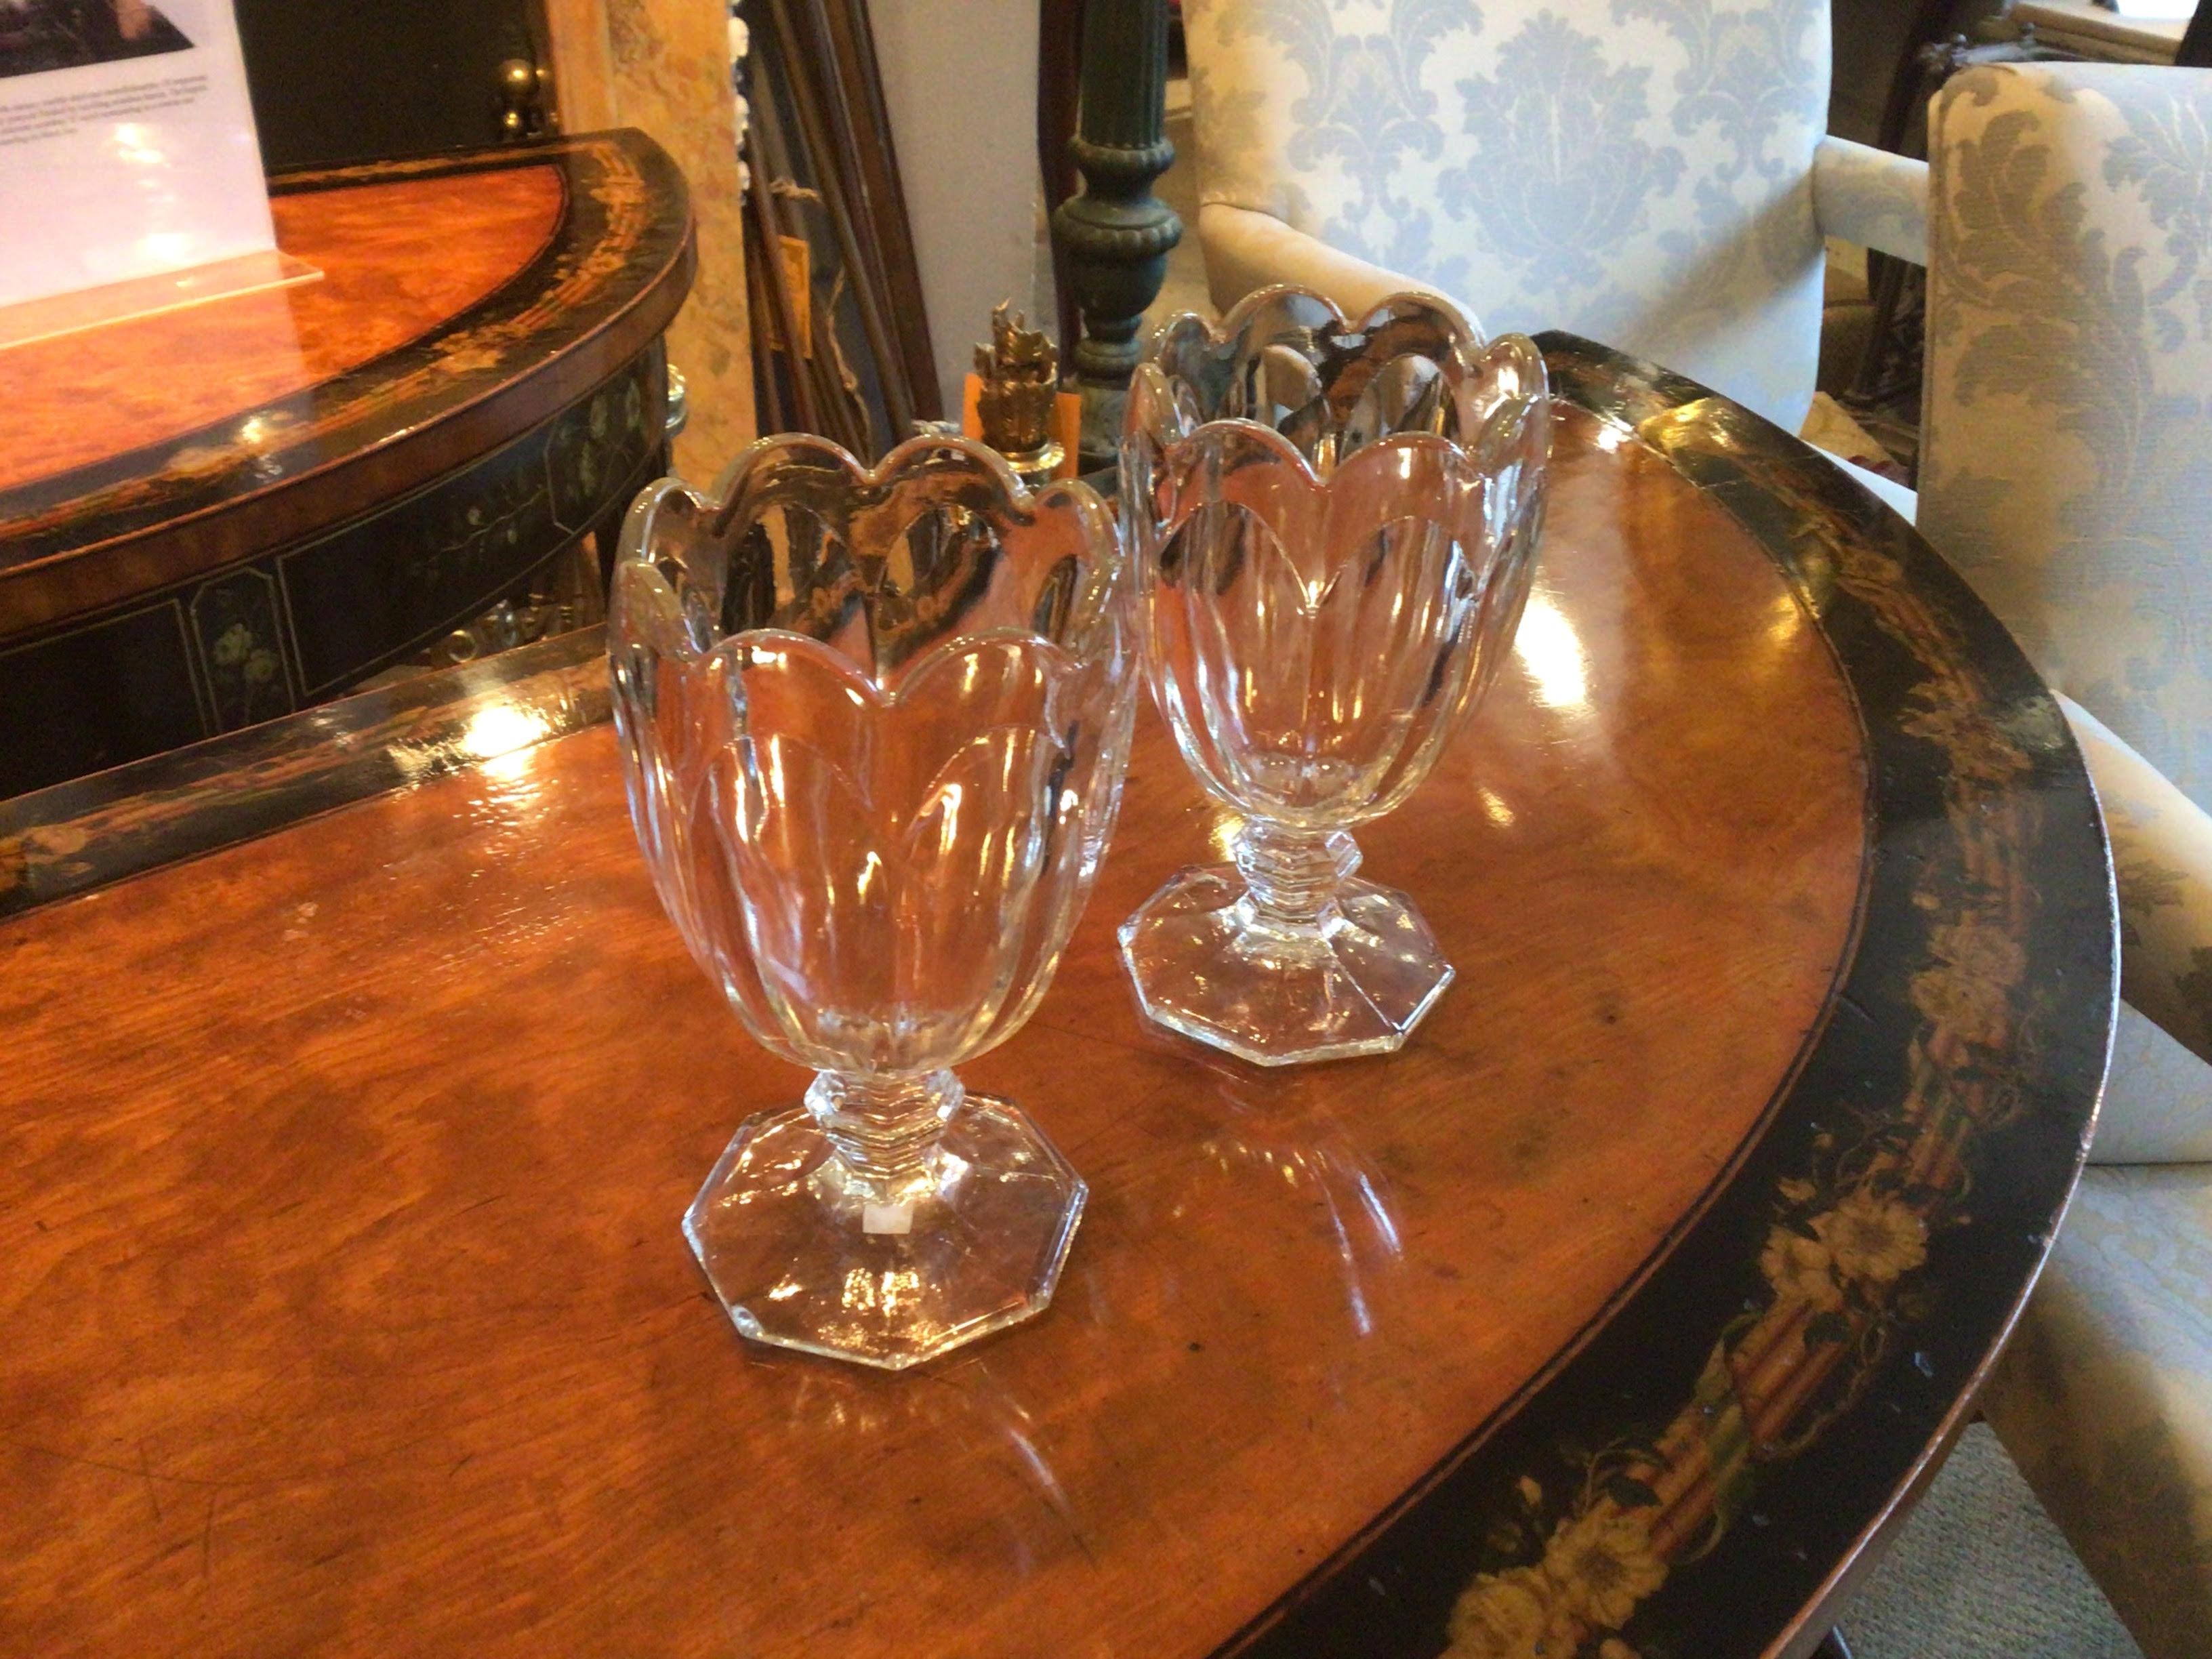 Pair of unusual and refined of antique celery glasses.

During the Victorian era stalks of the vegetable were presented in pressed glass vases filled with water to keep the celery fresh.